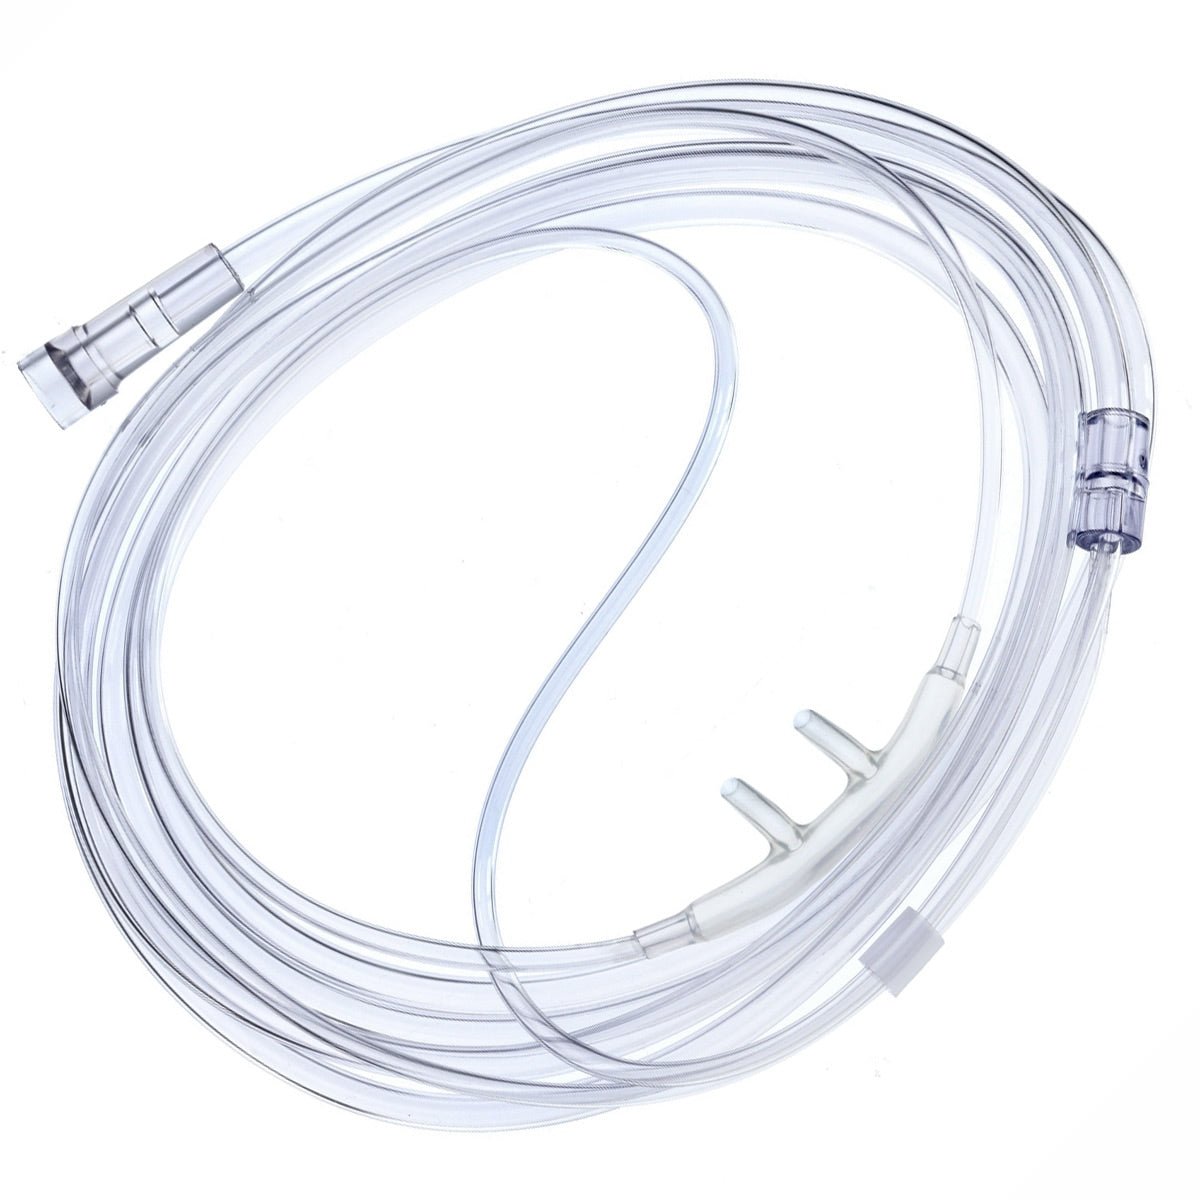 Softech Adult Nasal Cannula with 25 Foot Star Lumen Oxygen Supply Tubing